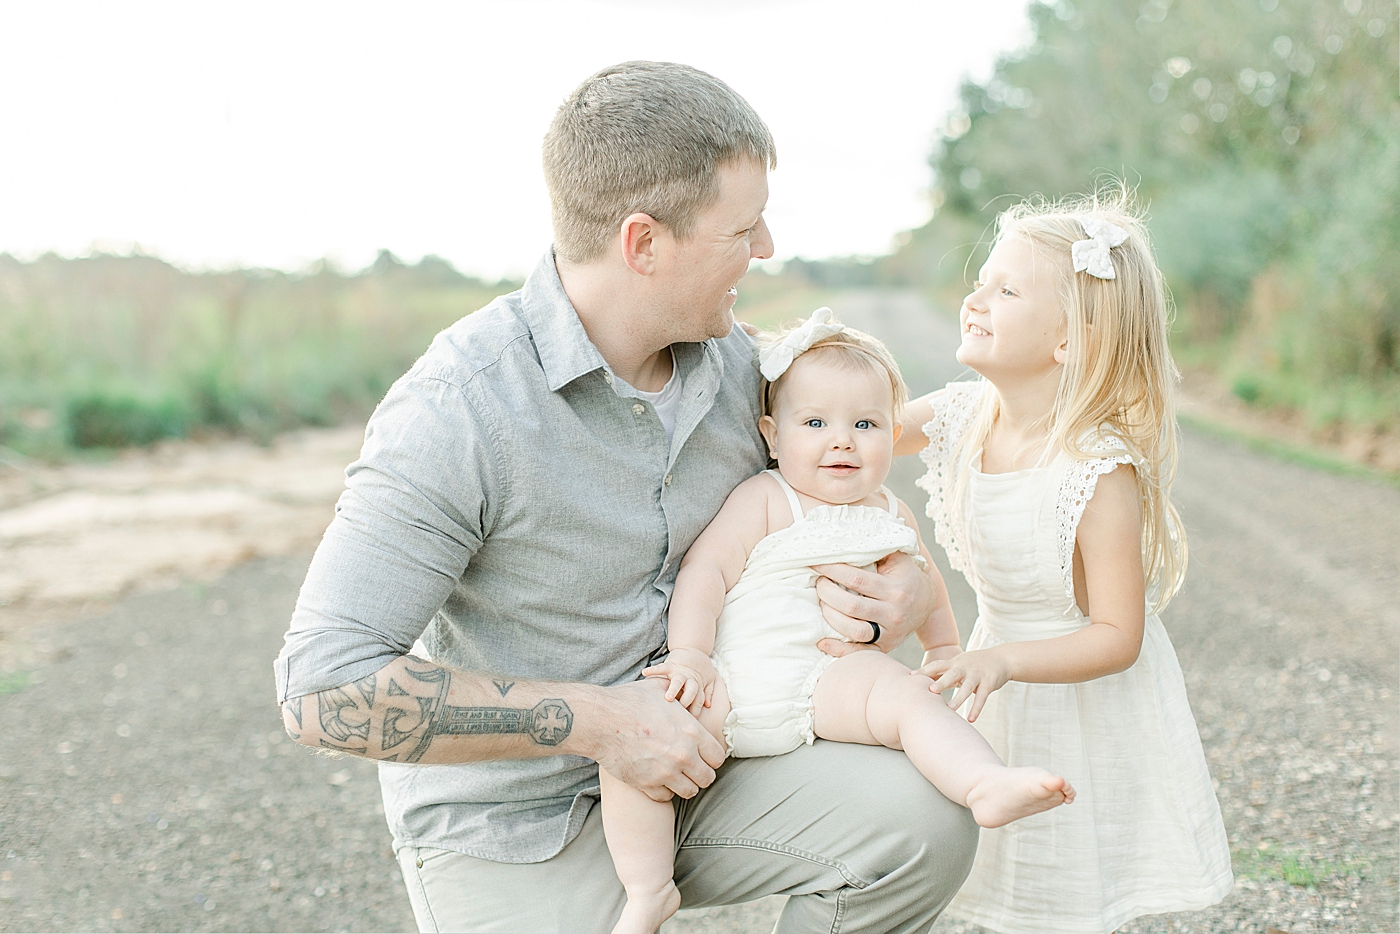 Dad smiling with two daughters | Photo by Little Sunshine Photography 